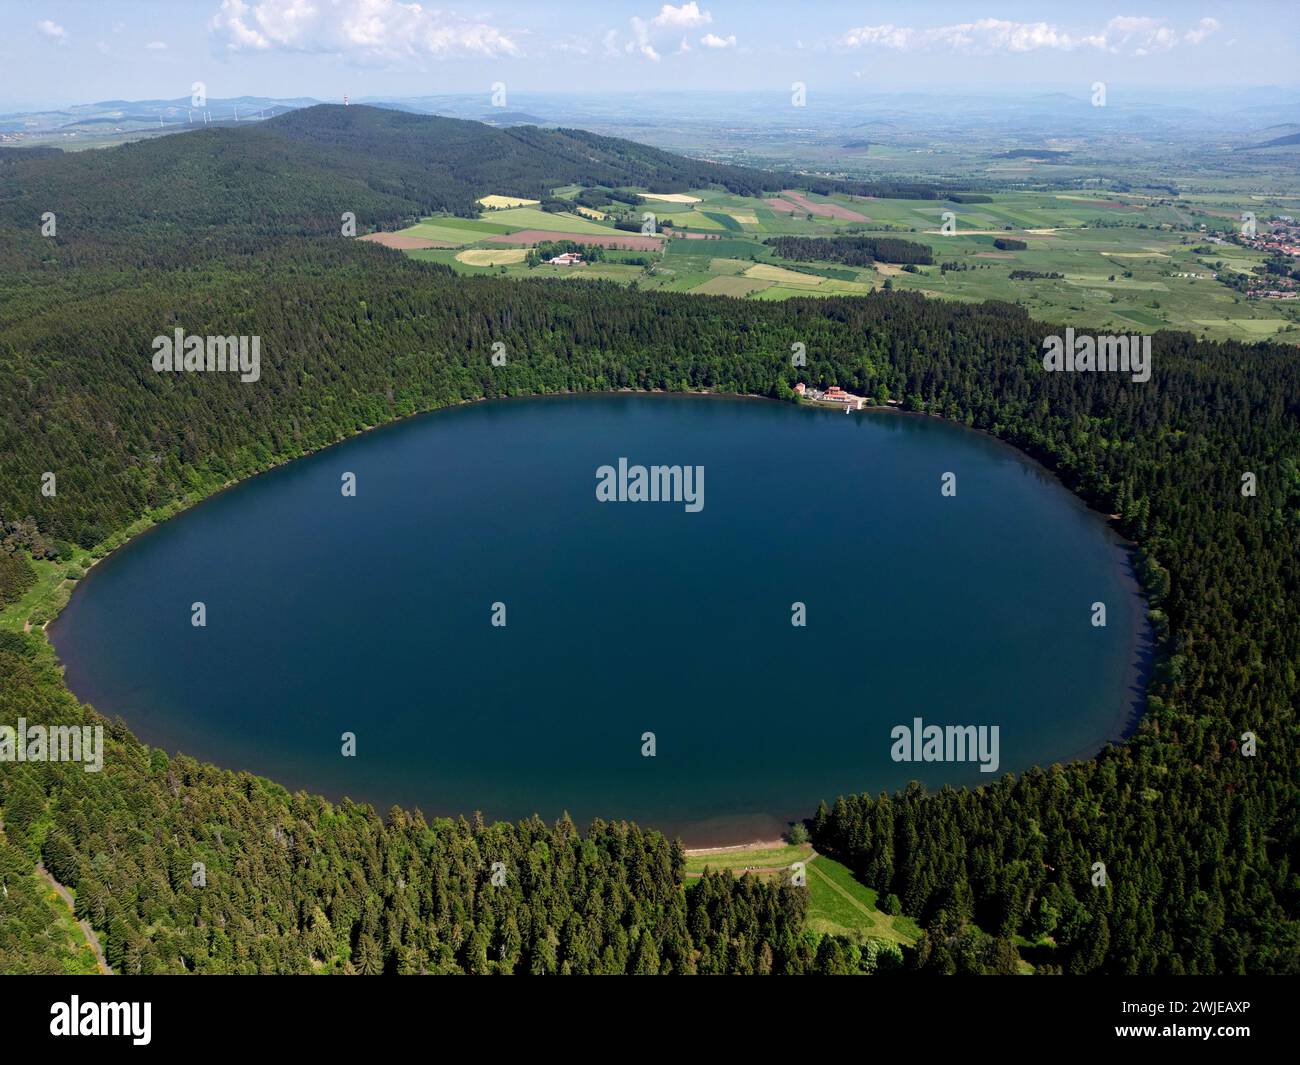 Haute-Loire department (south-central France): aerial view of the Bouchet Lake, a crater lake formed from an old volcano, and thus roughly circular, l Stock Photo